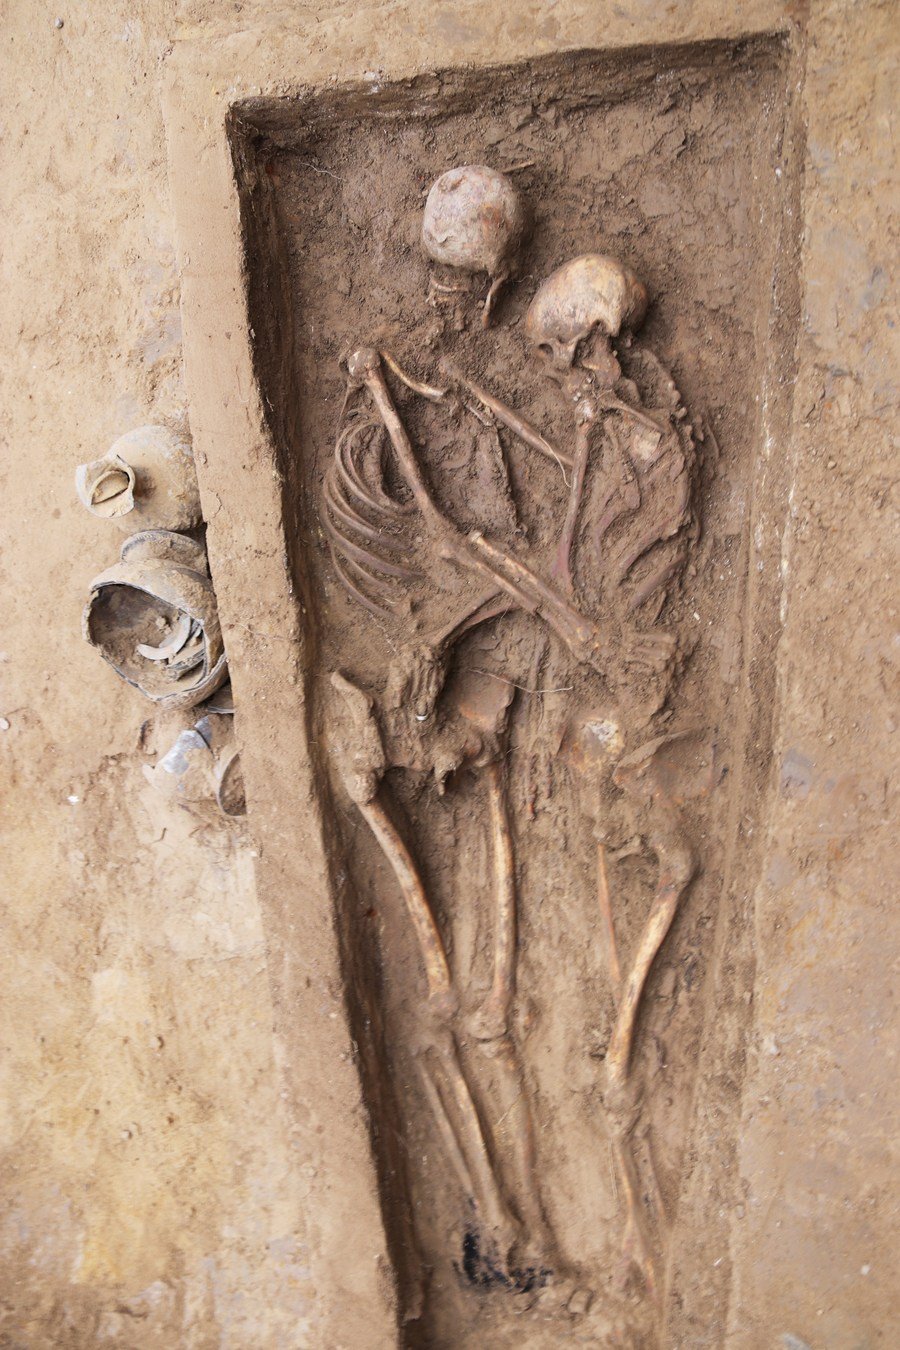 1,500-Year-Old Skeletons Found Locked in Embrace in Chinese Cemetery